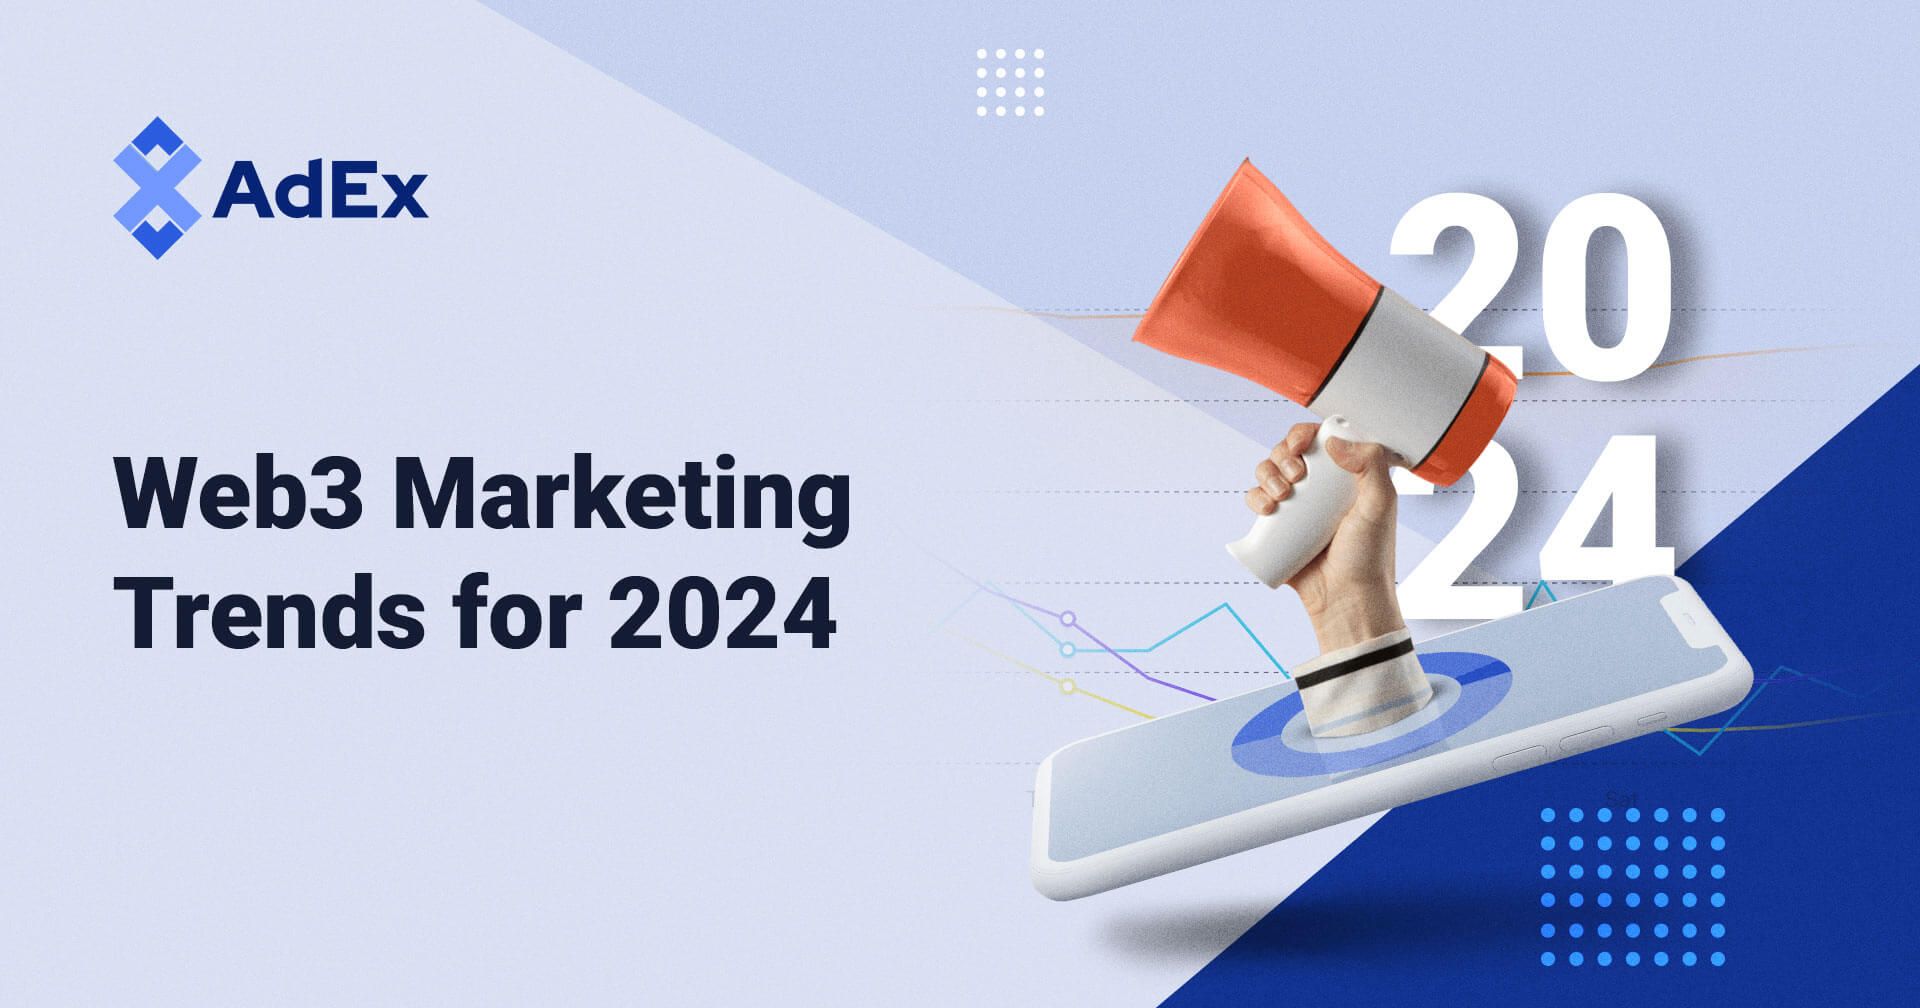 7 Web3 Marketing Trends to Explore in 2024